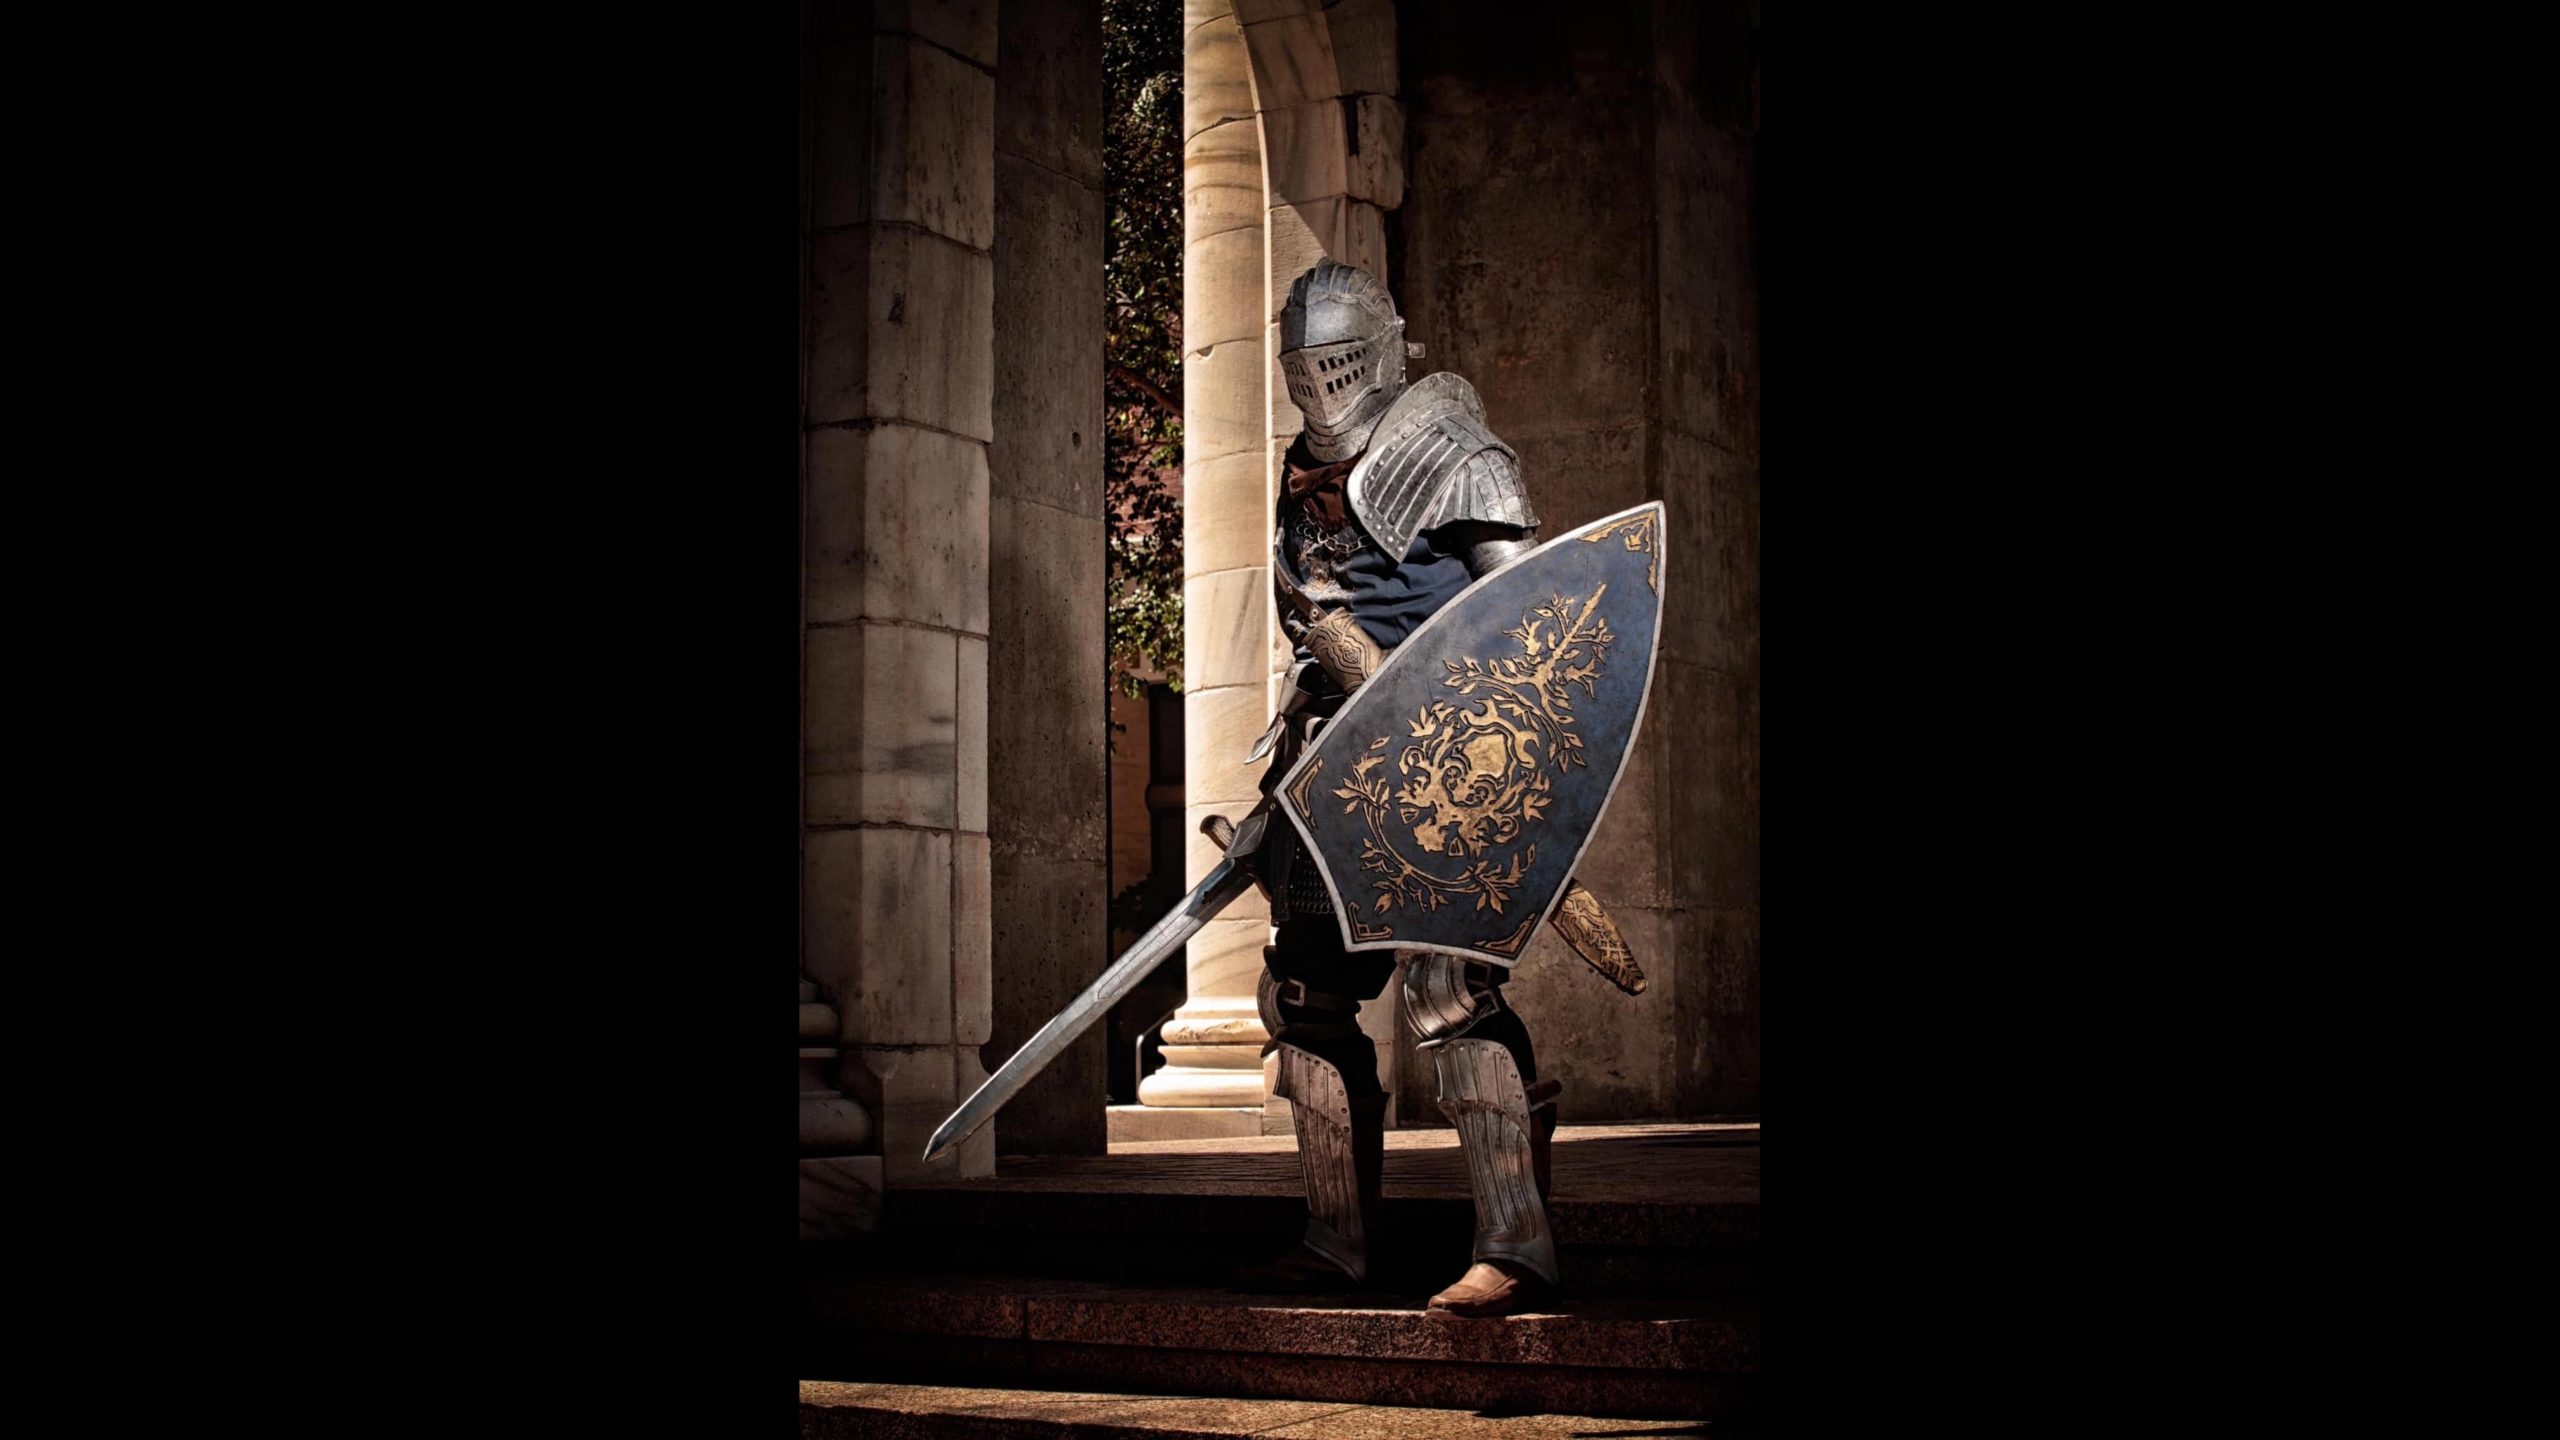 This Dark Souls Elite Knight is Goodwill's favourite cosplay to date.